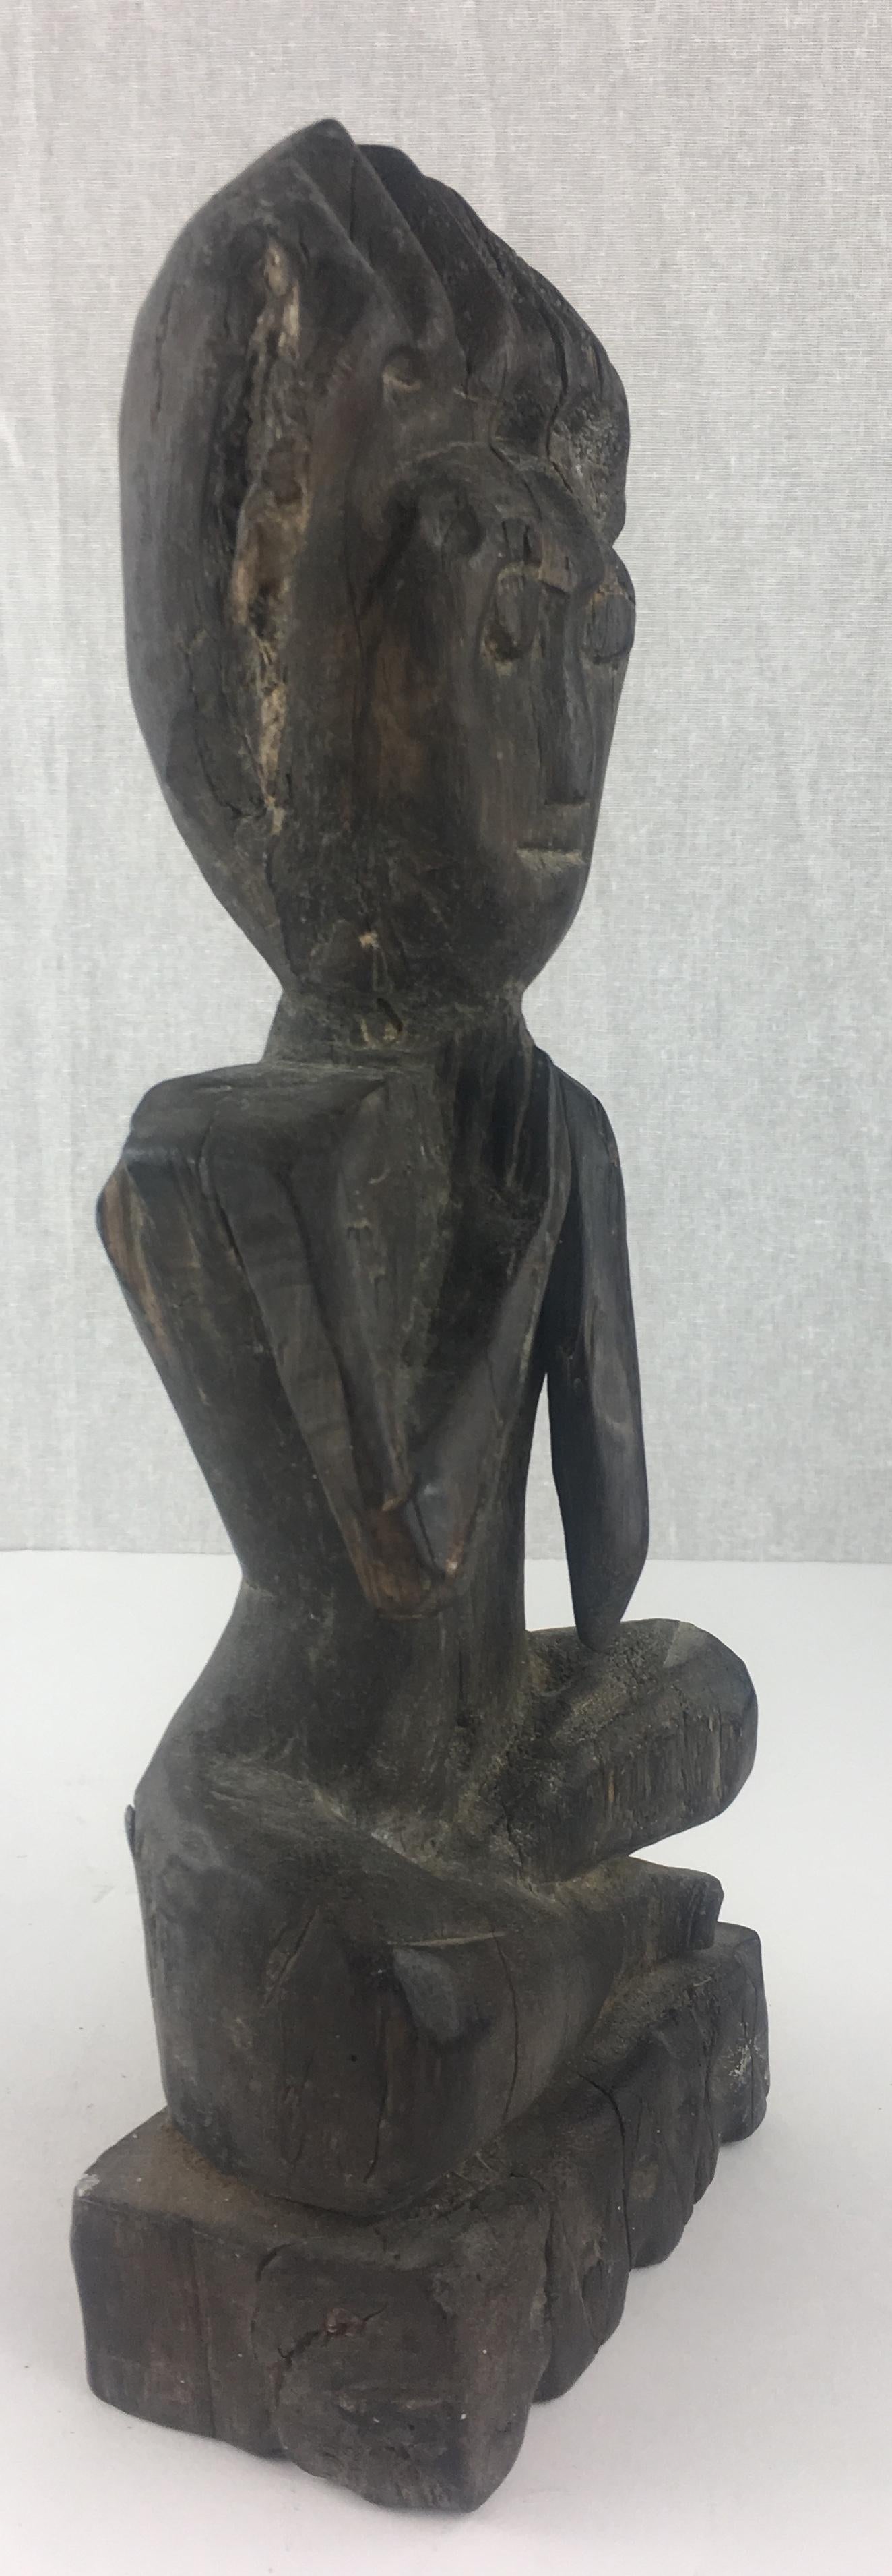 19th Century Hand Carved Wooden Balinese Yoga or Meditation Statue